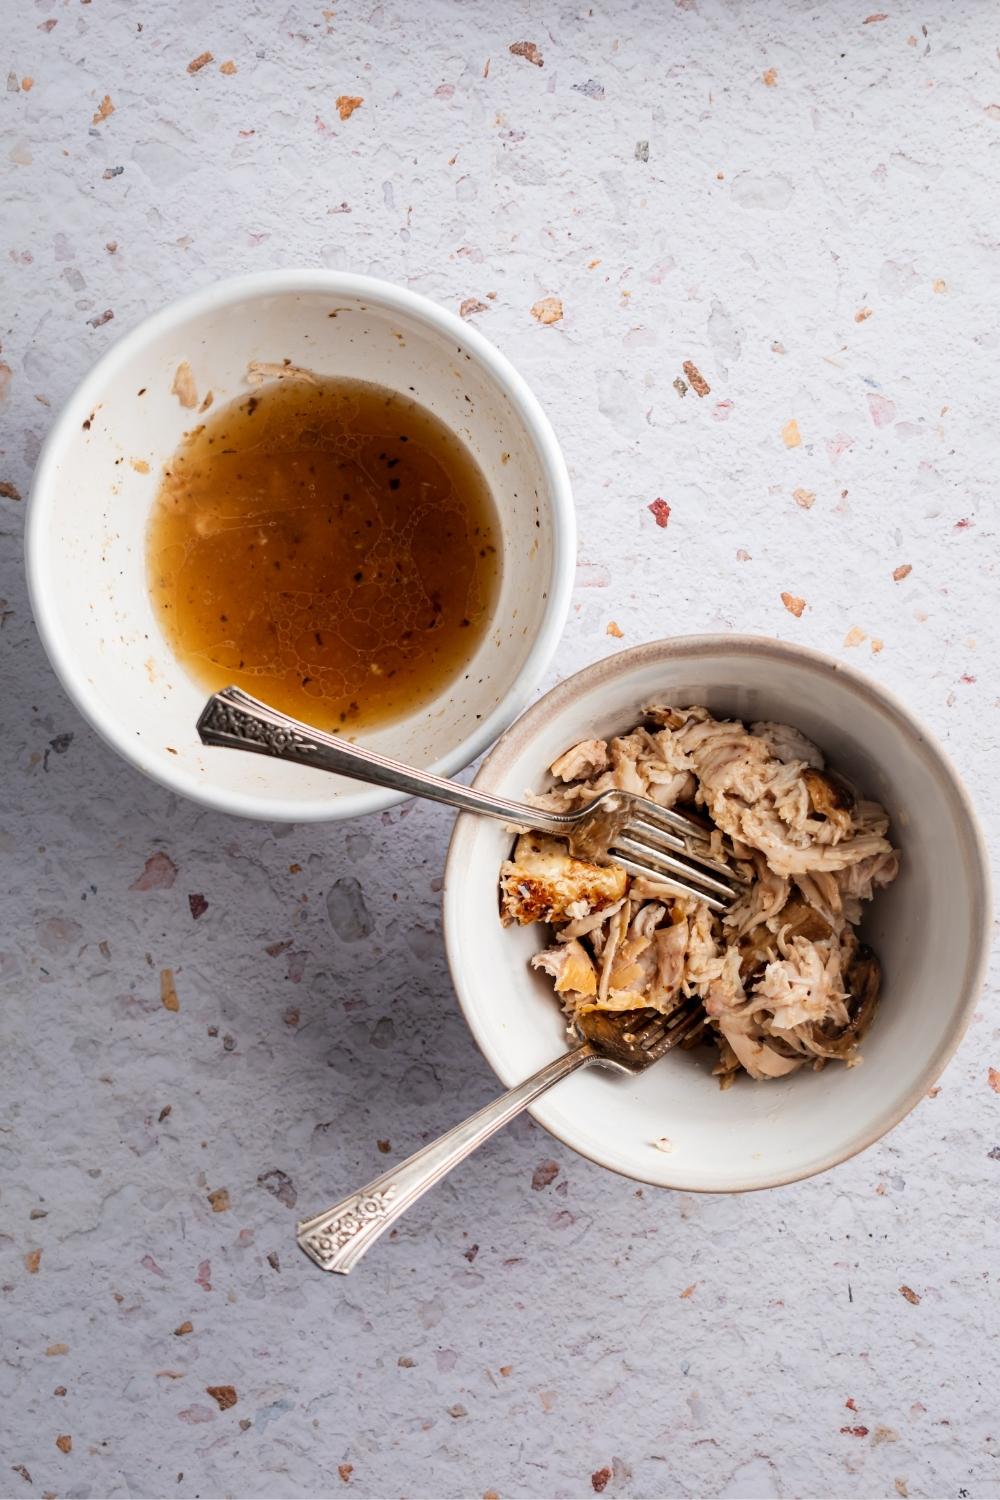 A bowl of rotisserie chicken and a bowl of the chicken juice on a white counter.